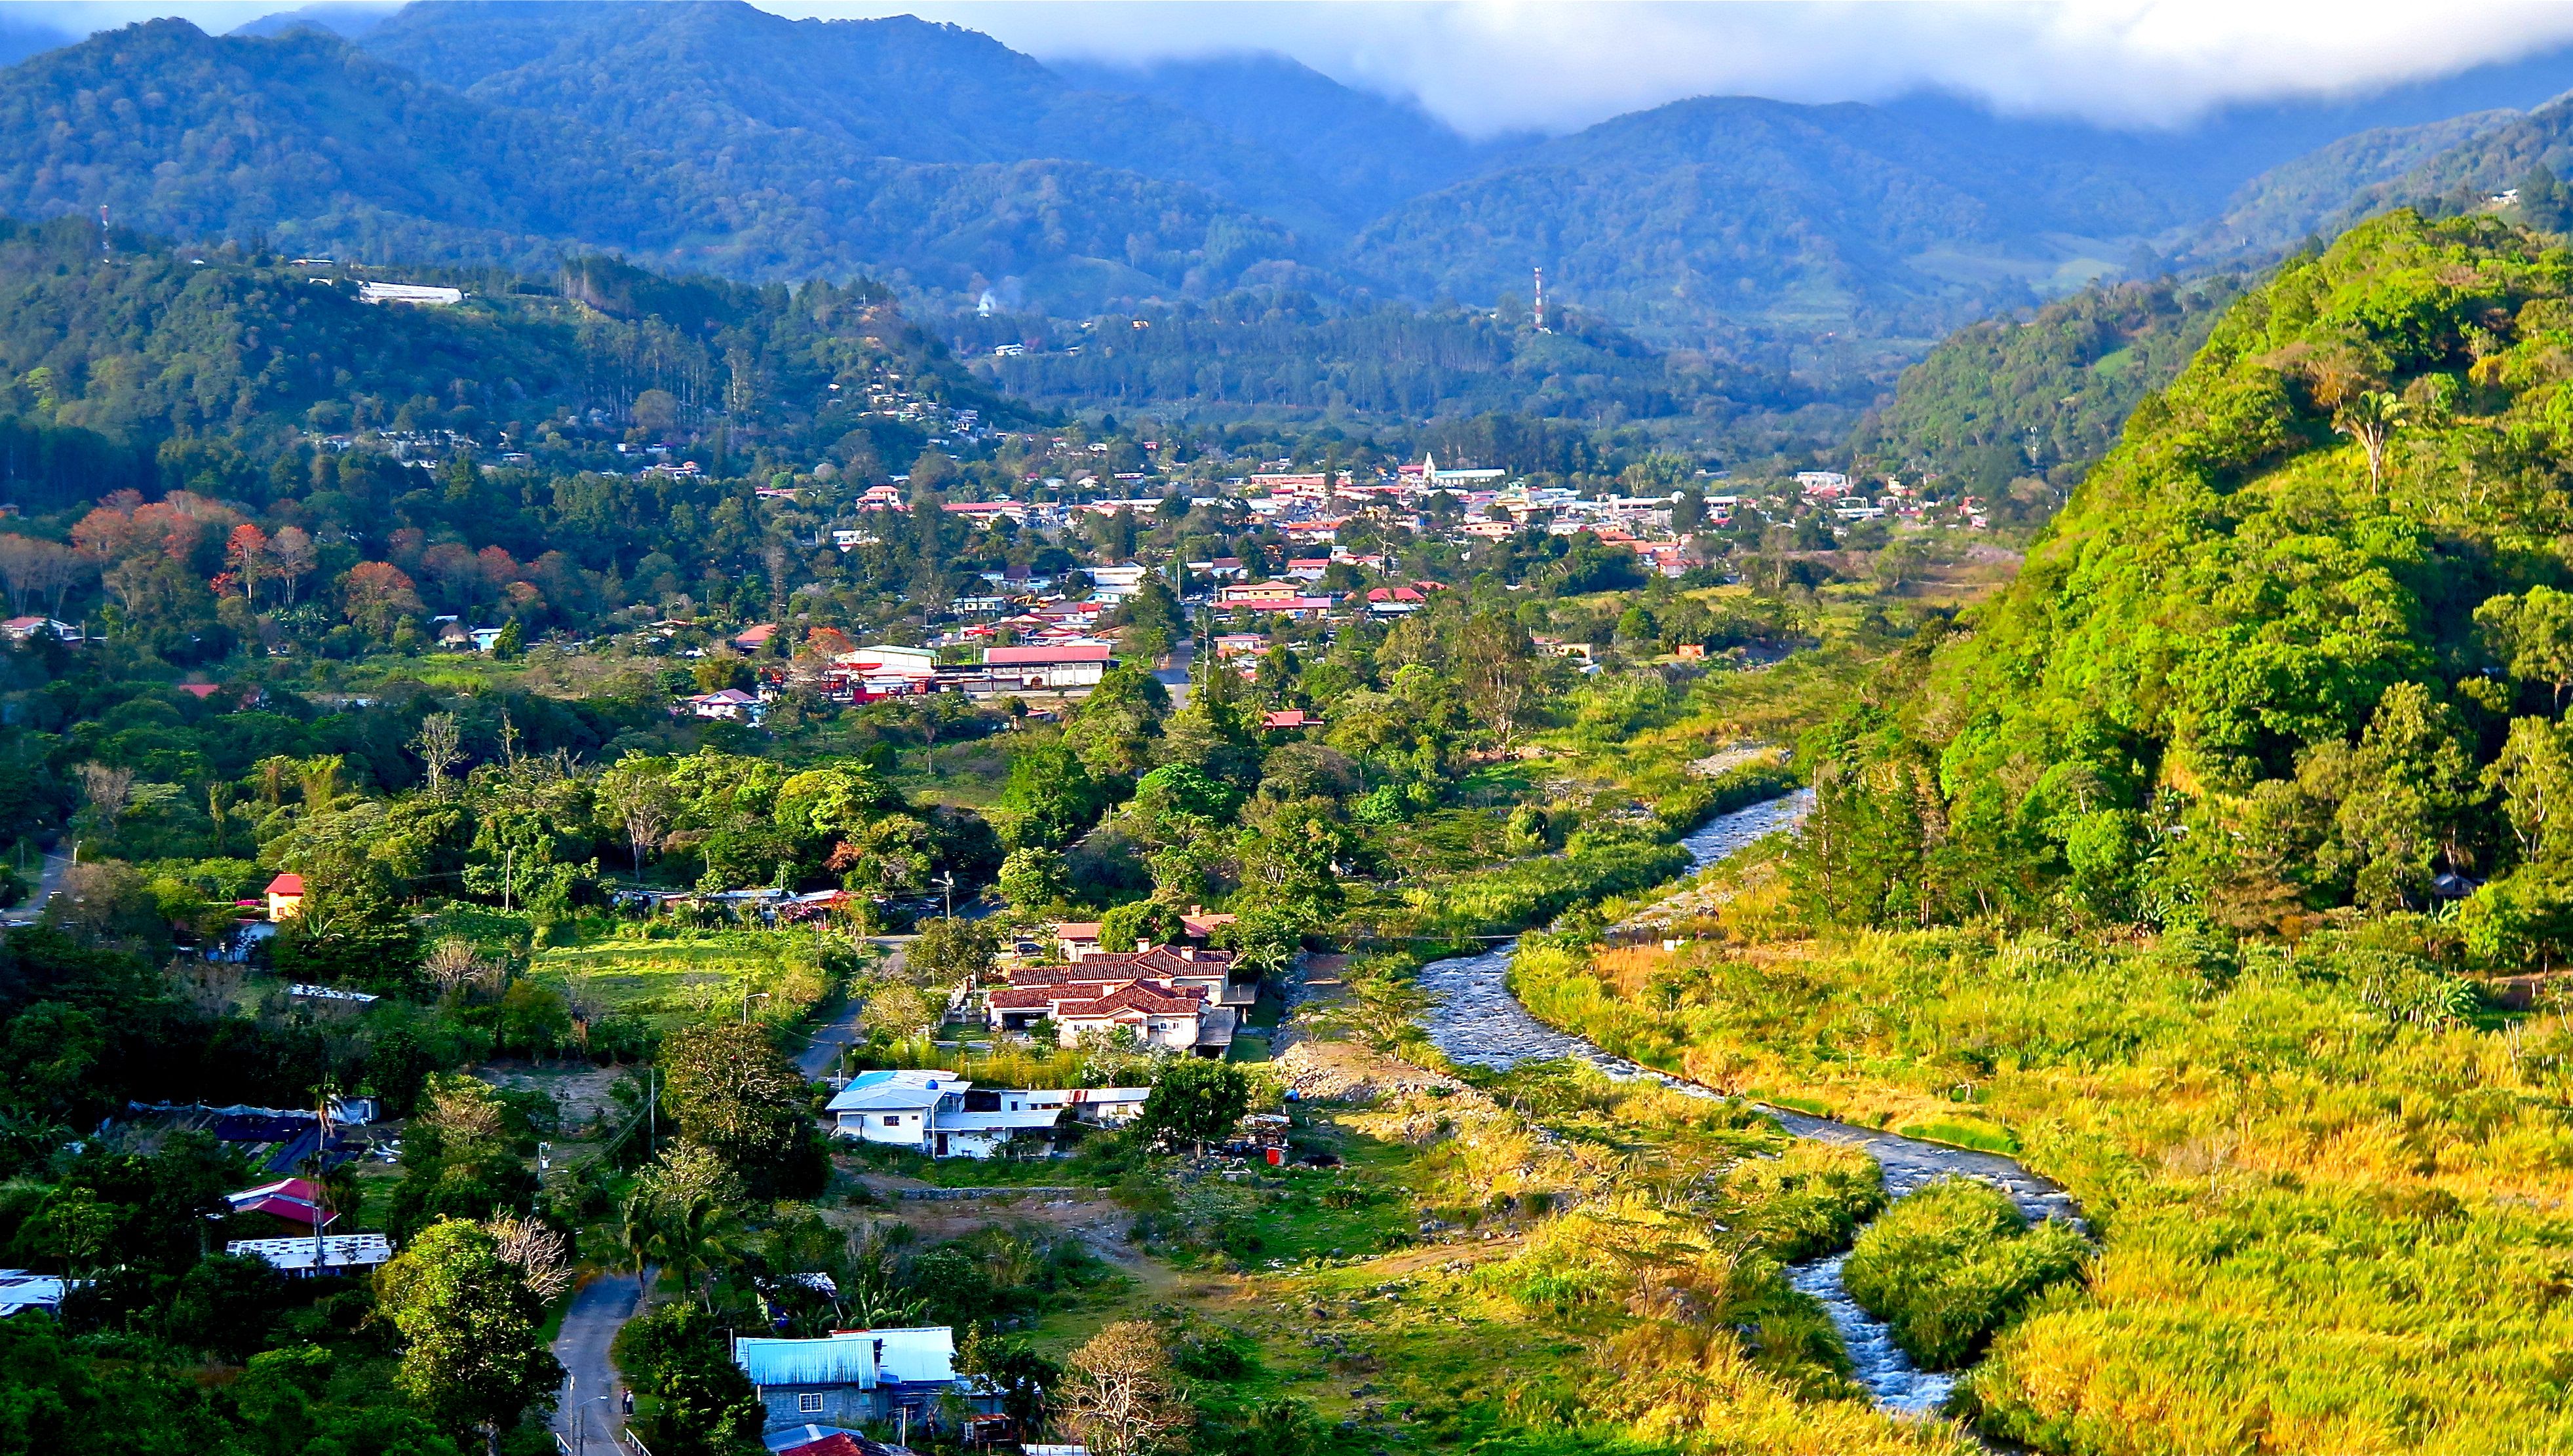 Boquete, Panama, in the mountains close to Costa Rica, sets in a valley below Volcan Baru, the nation's tallest mountain. Photo/Keith Schneider